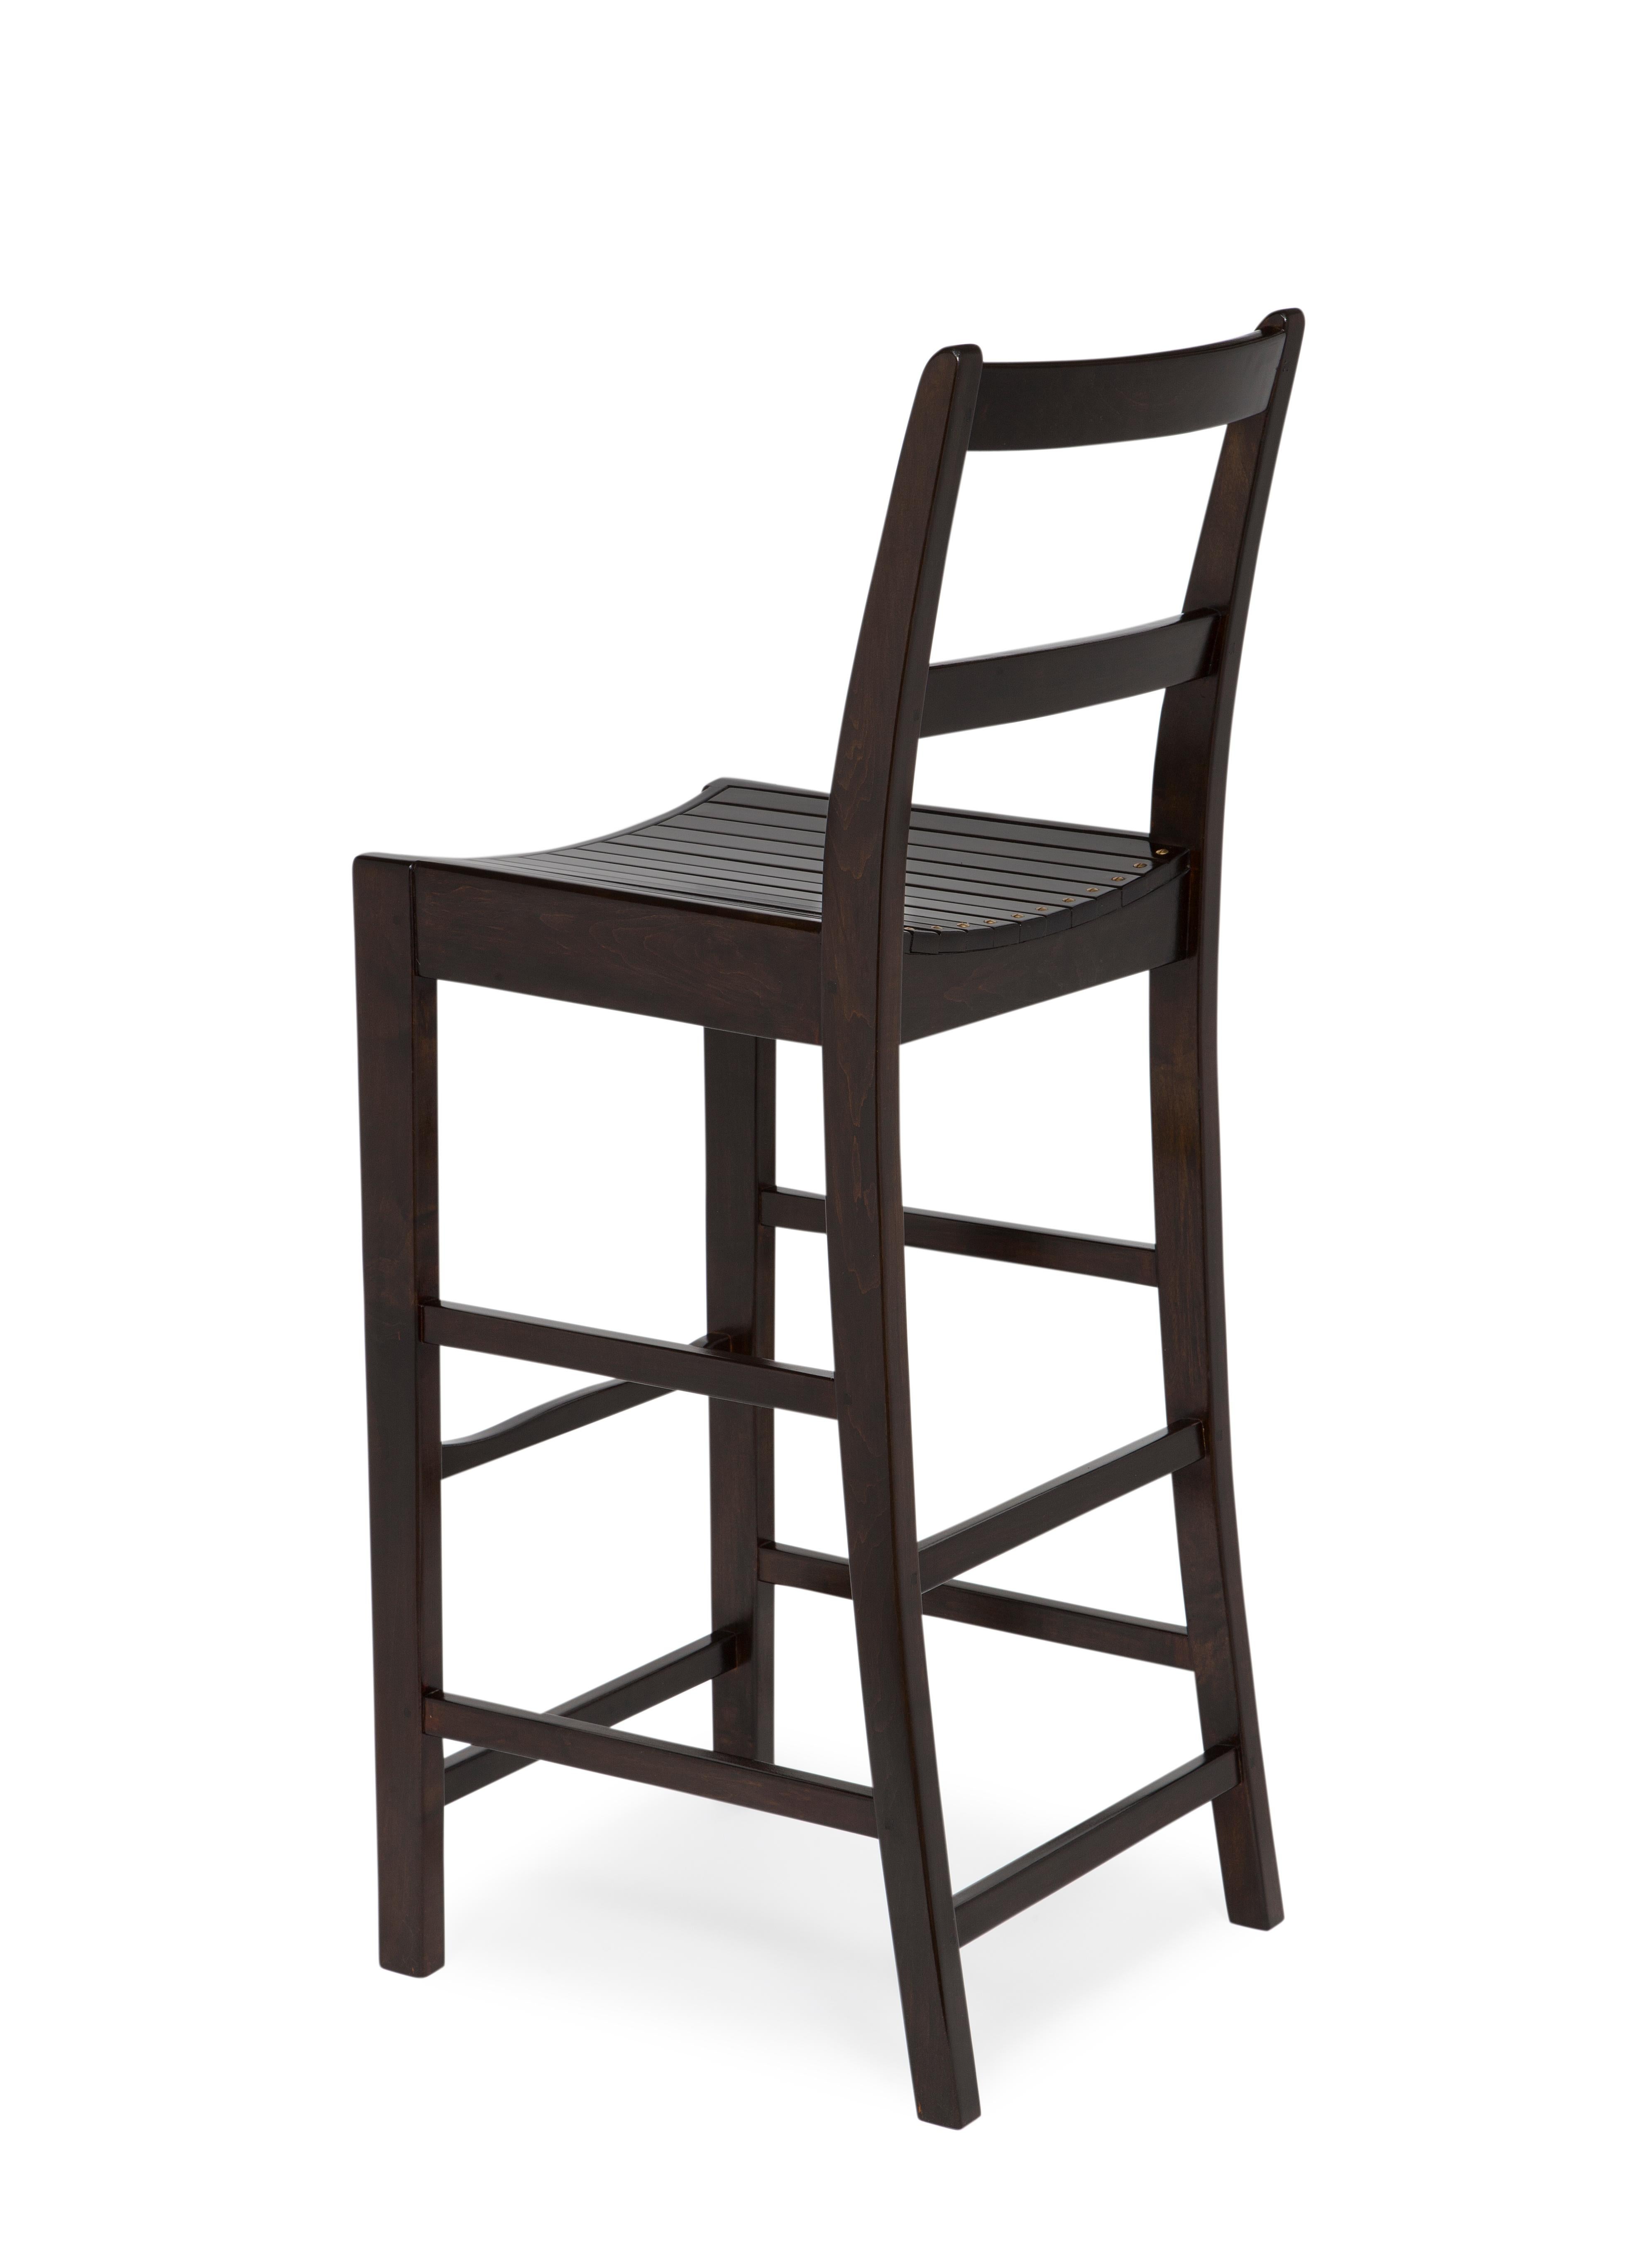 Available in any wood finish or paint color

Custom made to any seat height

The A-M Bar Stool is completely custom made. The seat height is custom and can be any height not exceeding 30″. The color is custom. The A-M Bar Stool can be painted or